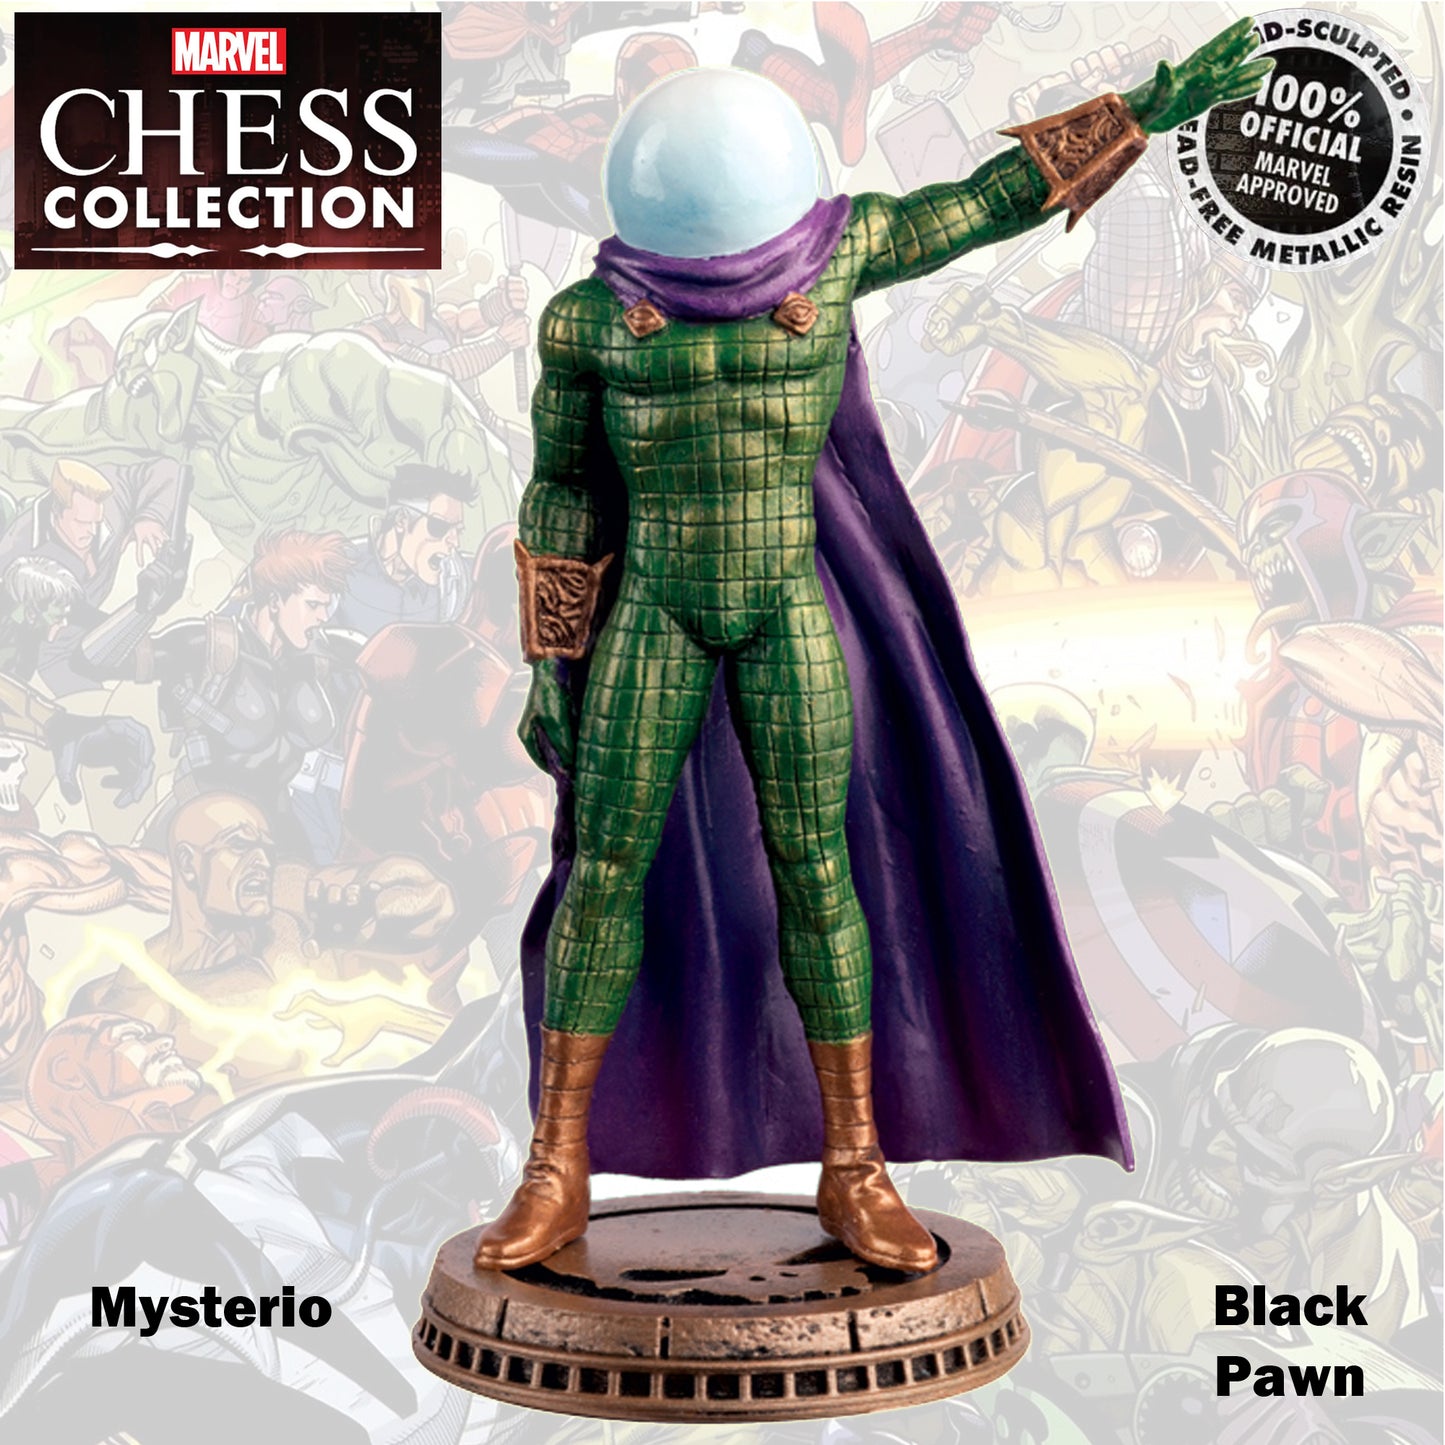 Marvel Chess Collection 9cm Mysterio Black Pawn 92